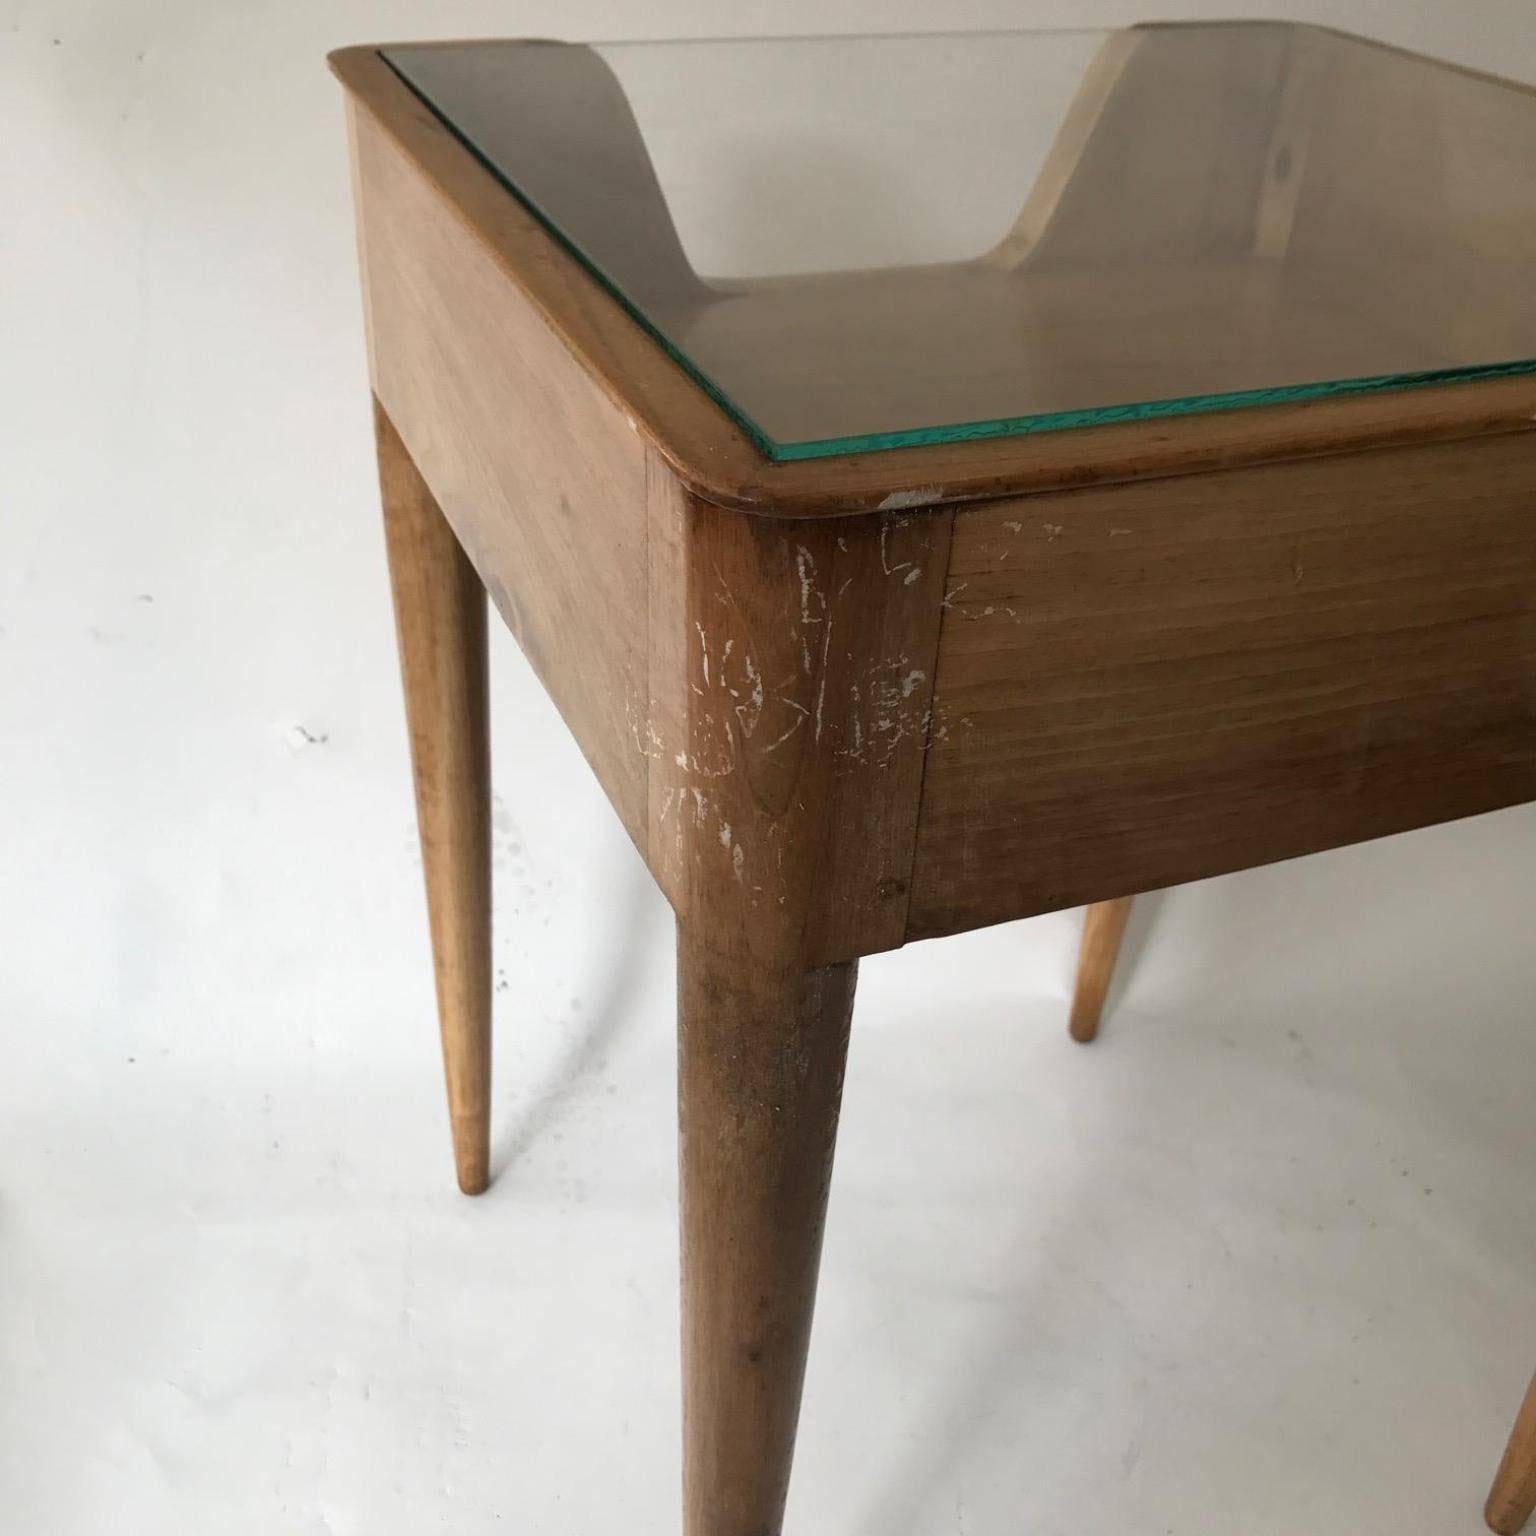 Pair of Side Tables circa 1937 Attributed to Gio Ponti, Italian, Milan For Sale 2